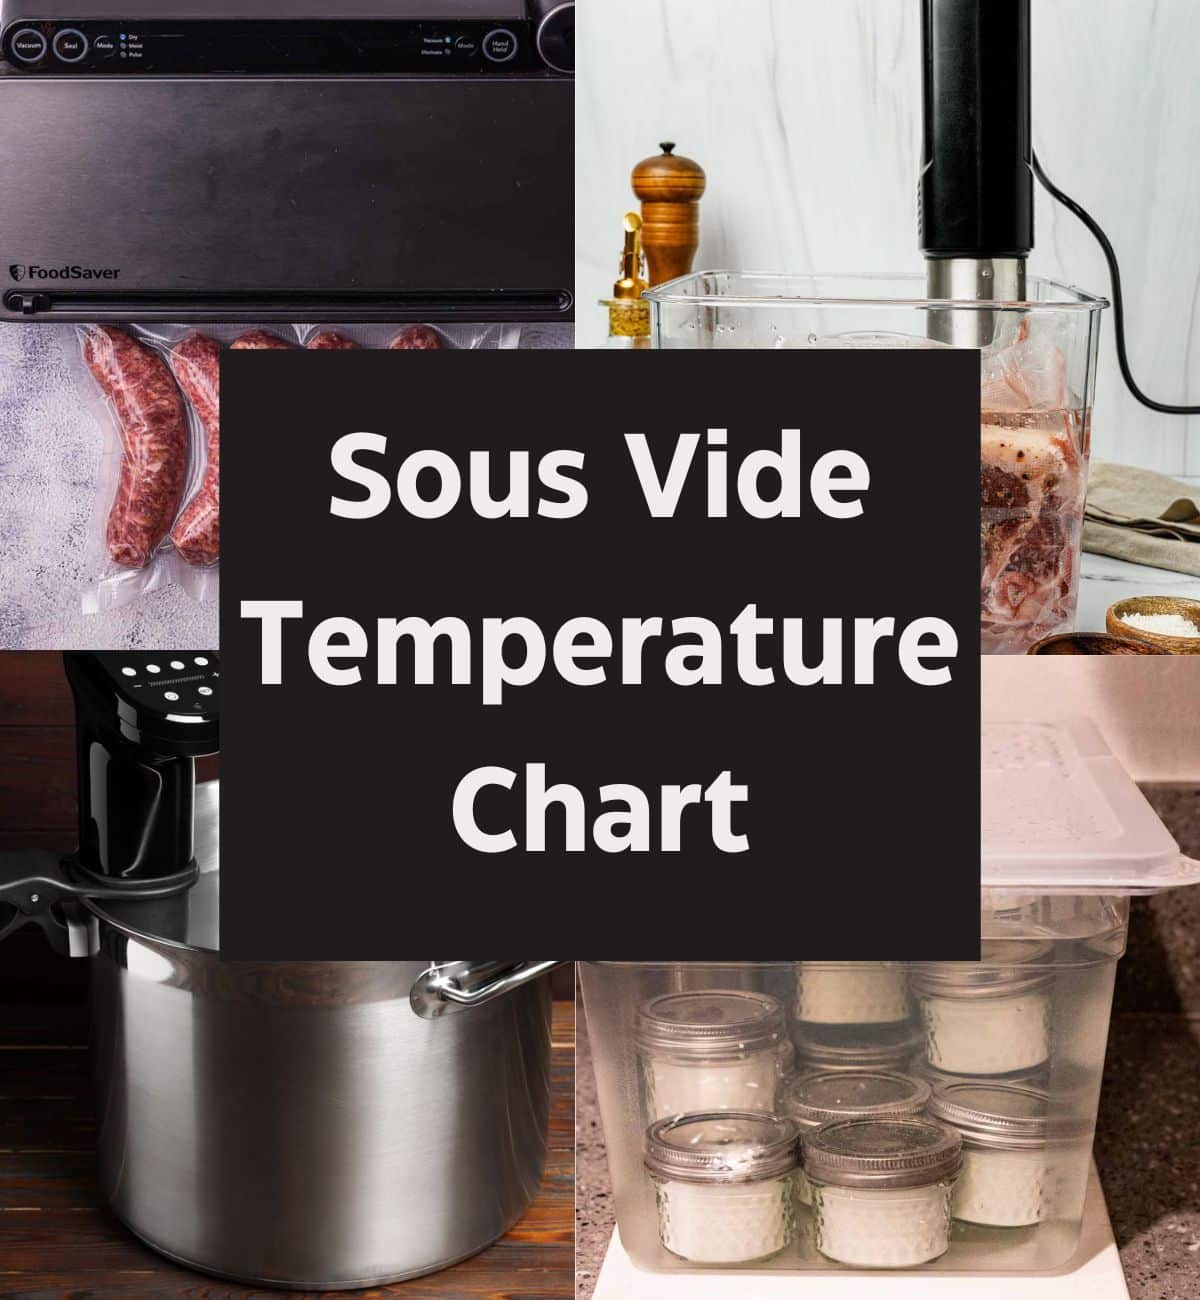 Experiments to Determine How Long Will a Sous Vide Ice Bath Keep Food Safe